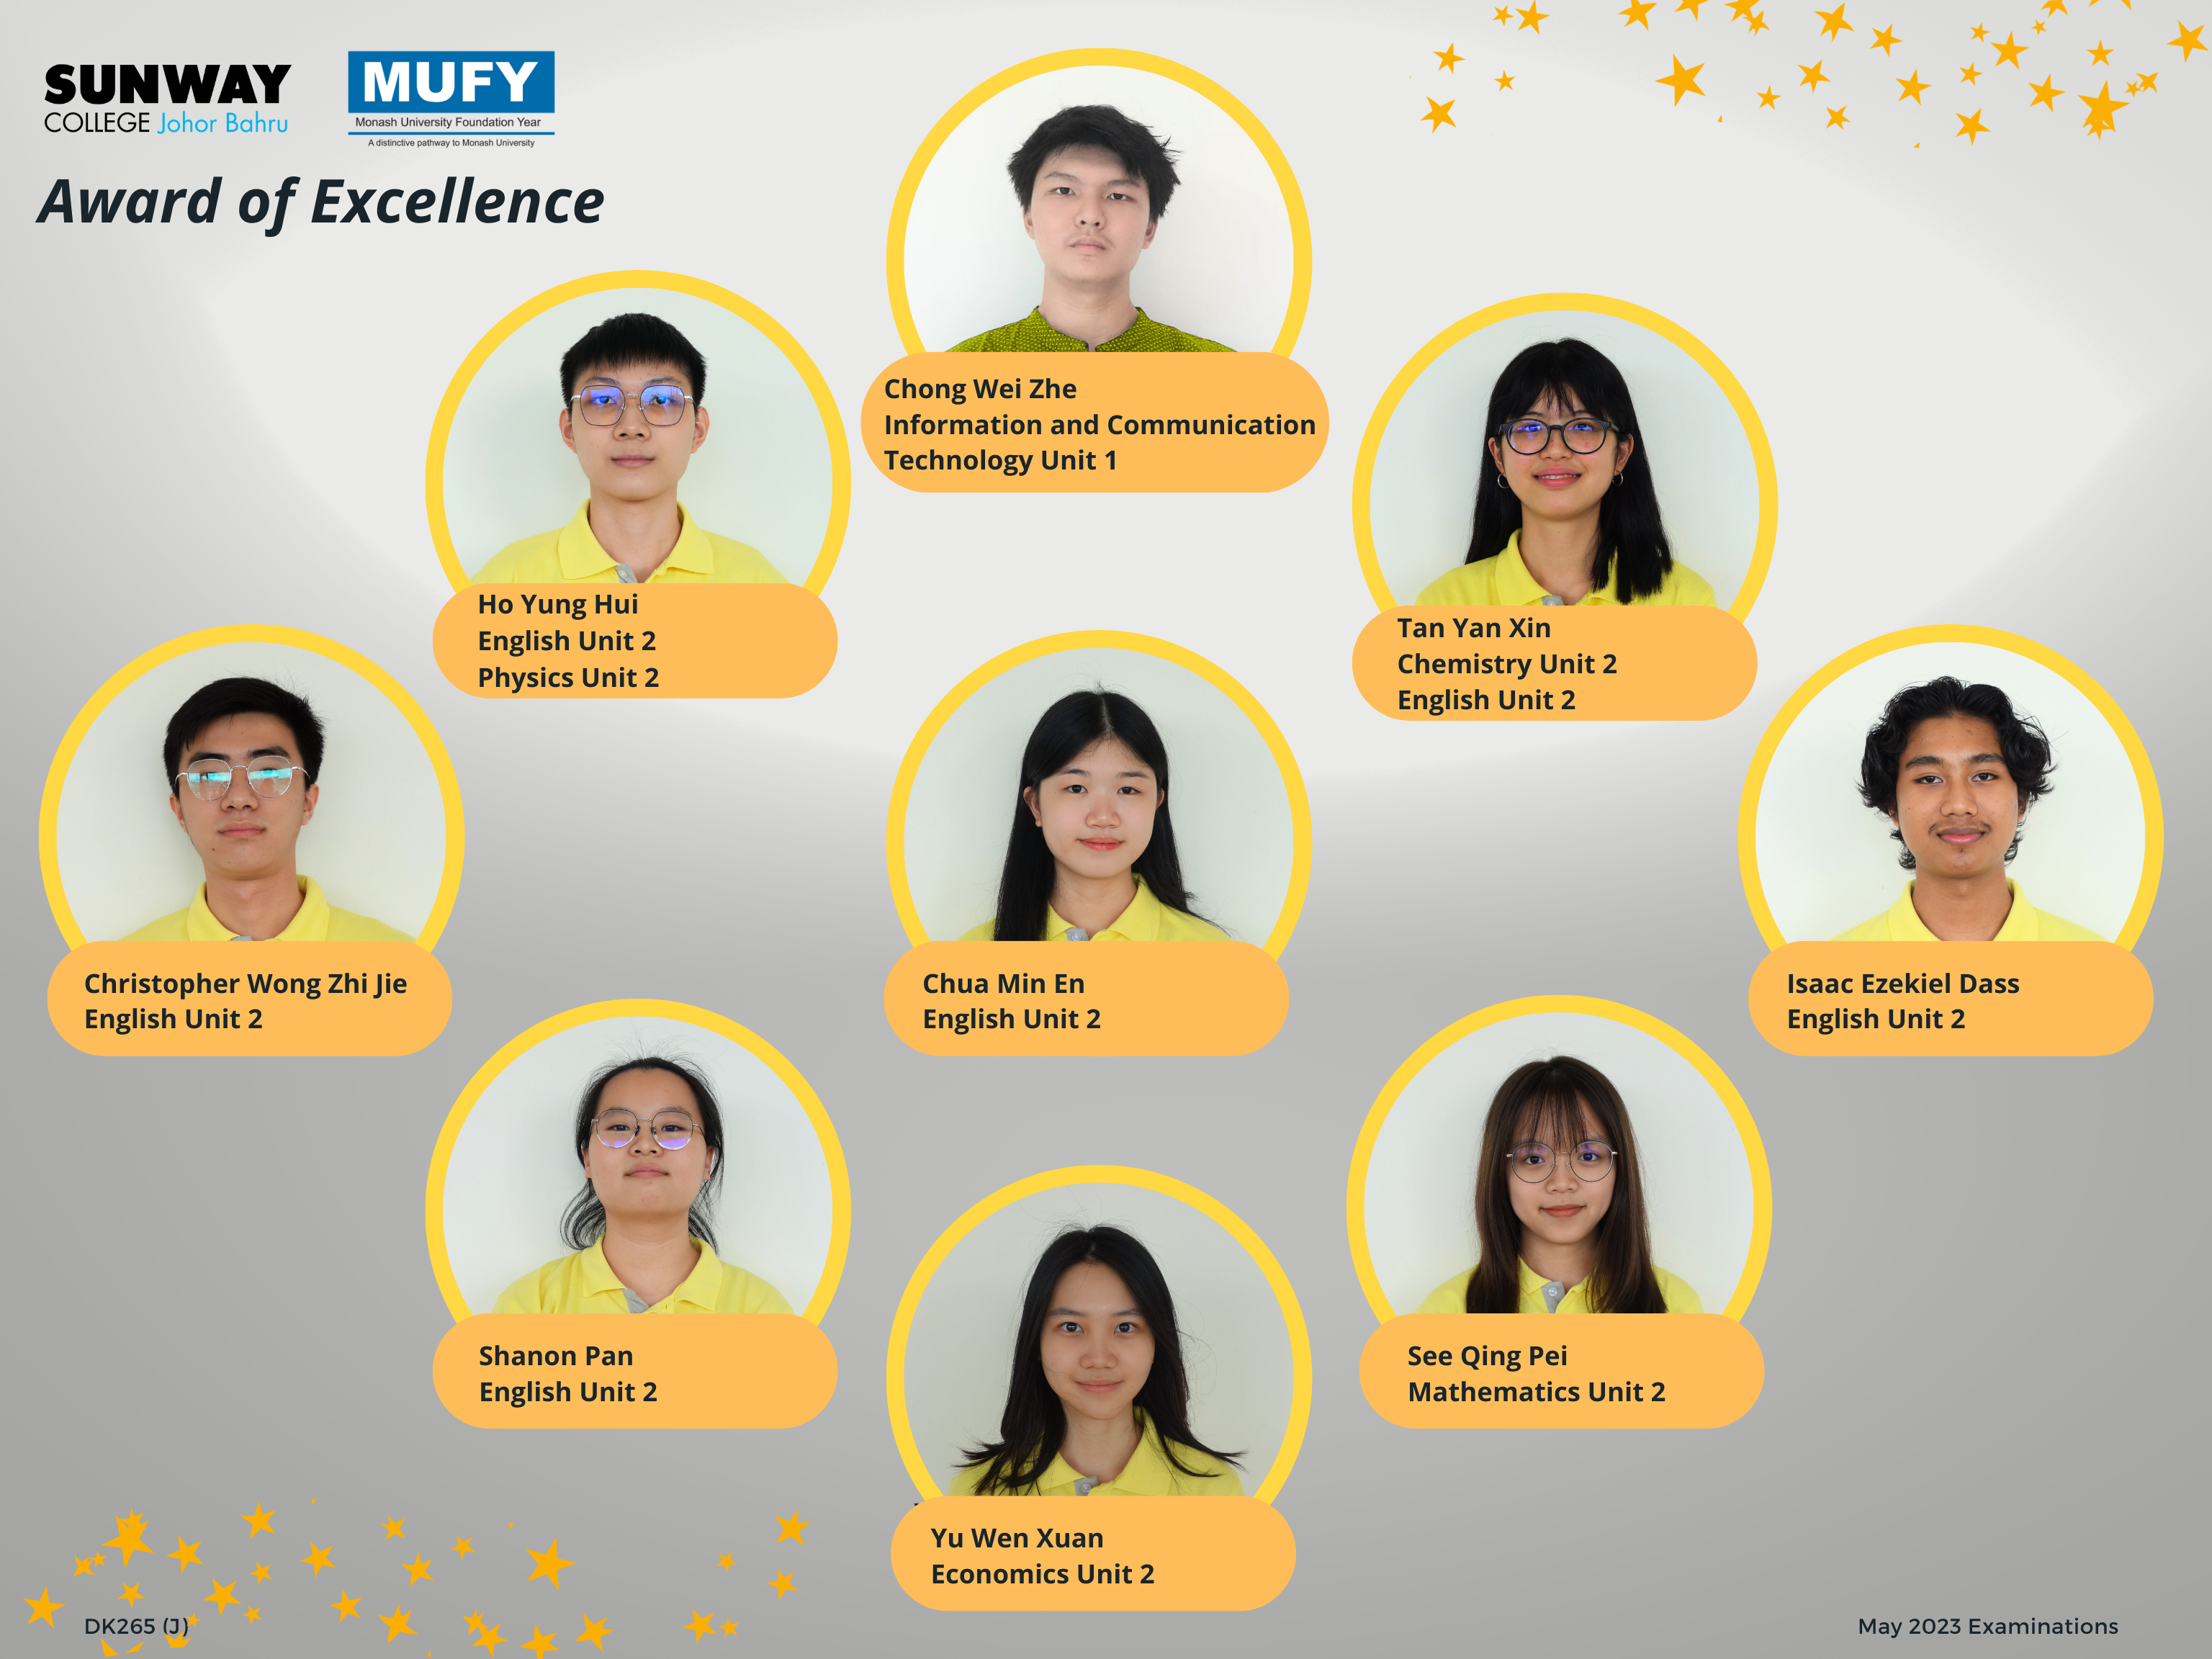 MUFY Award of Excellence   June 2023